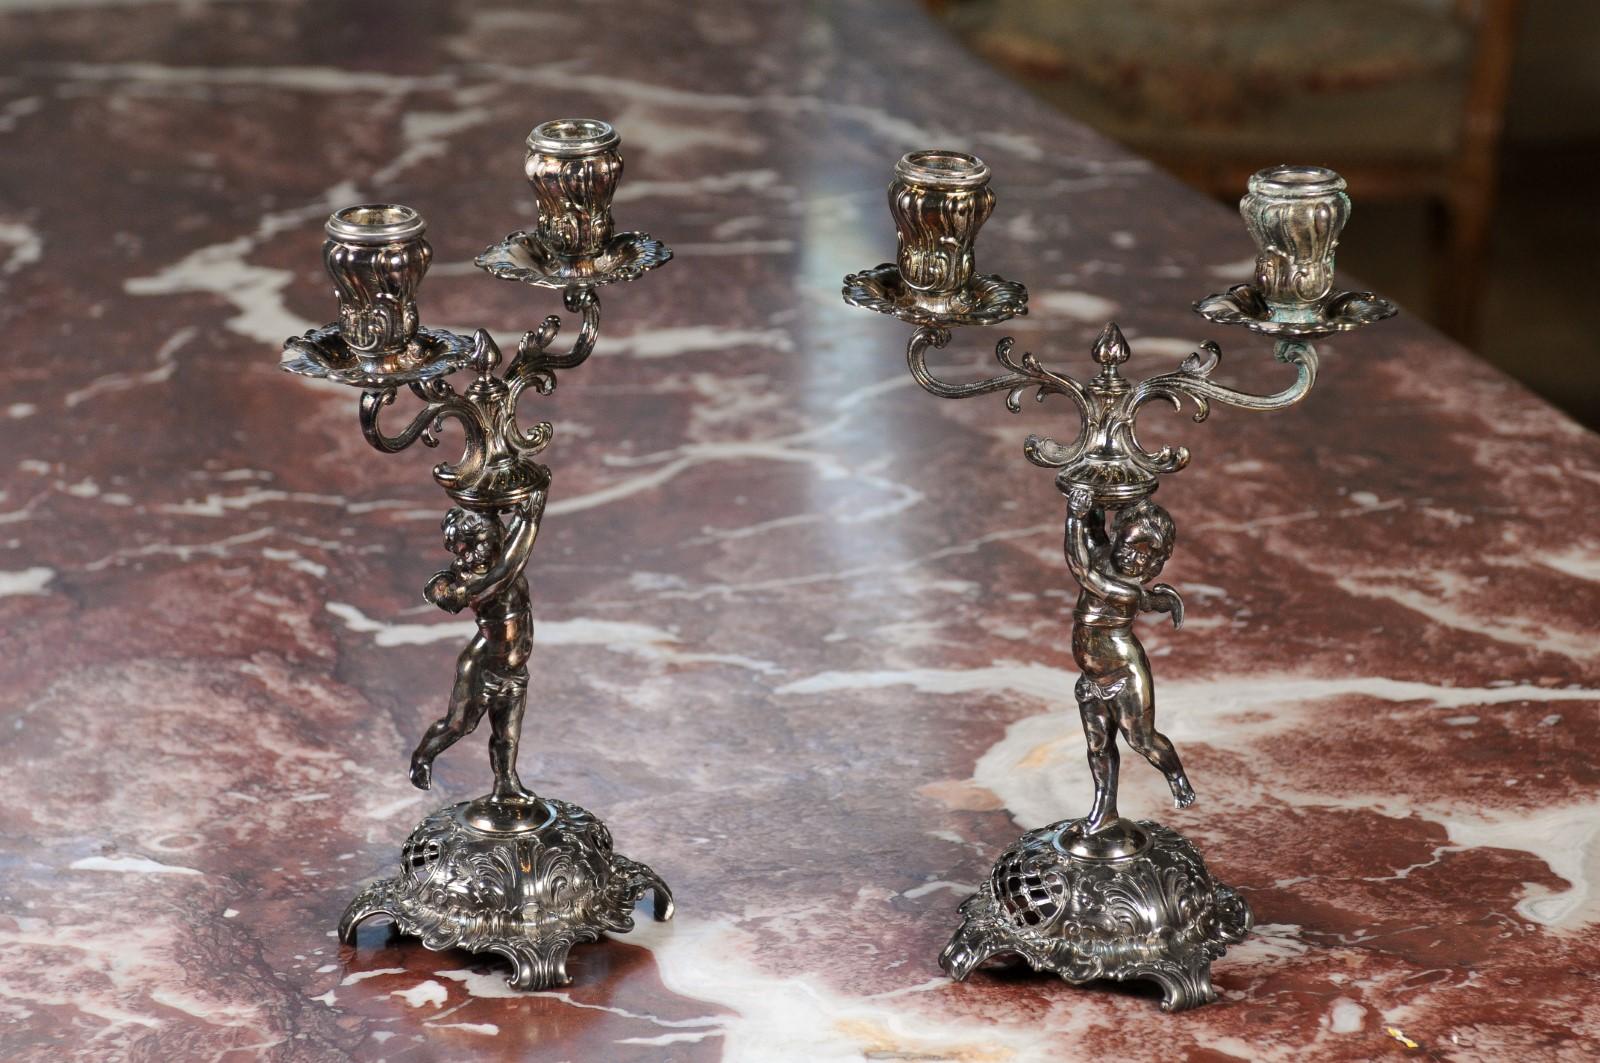 A pair of German Jugendstil late 19th century silver plated candelabras from the Wurtemberg Metalware Factory, with cherubs holding the bobèches. Born in Germany in the Württembergische Metallwarenfabrik (WMF) during the last quarter of the 19th